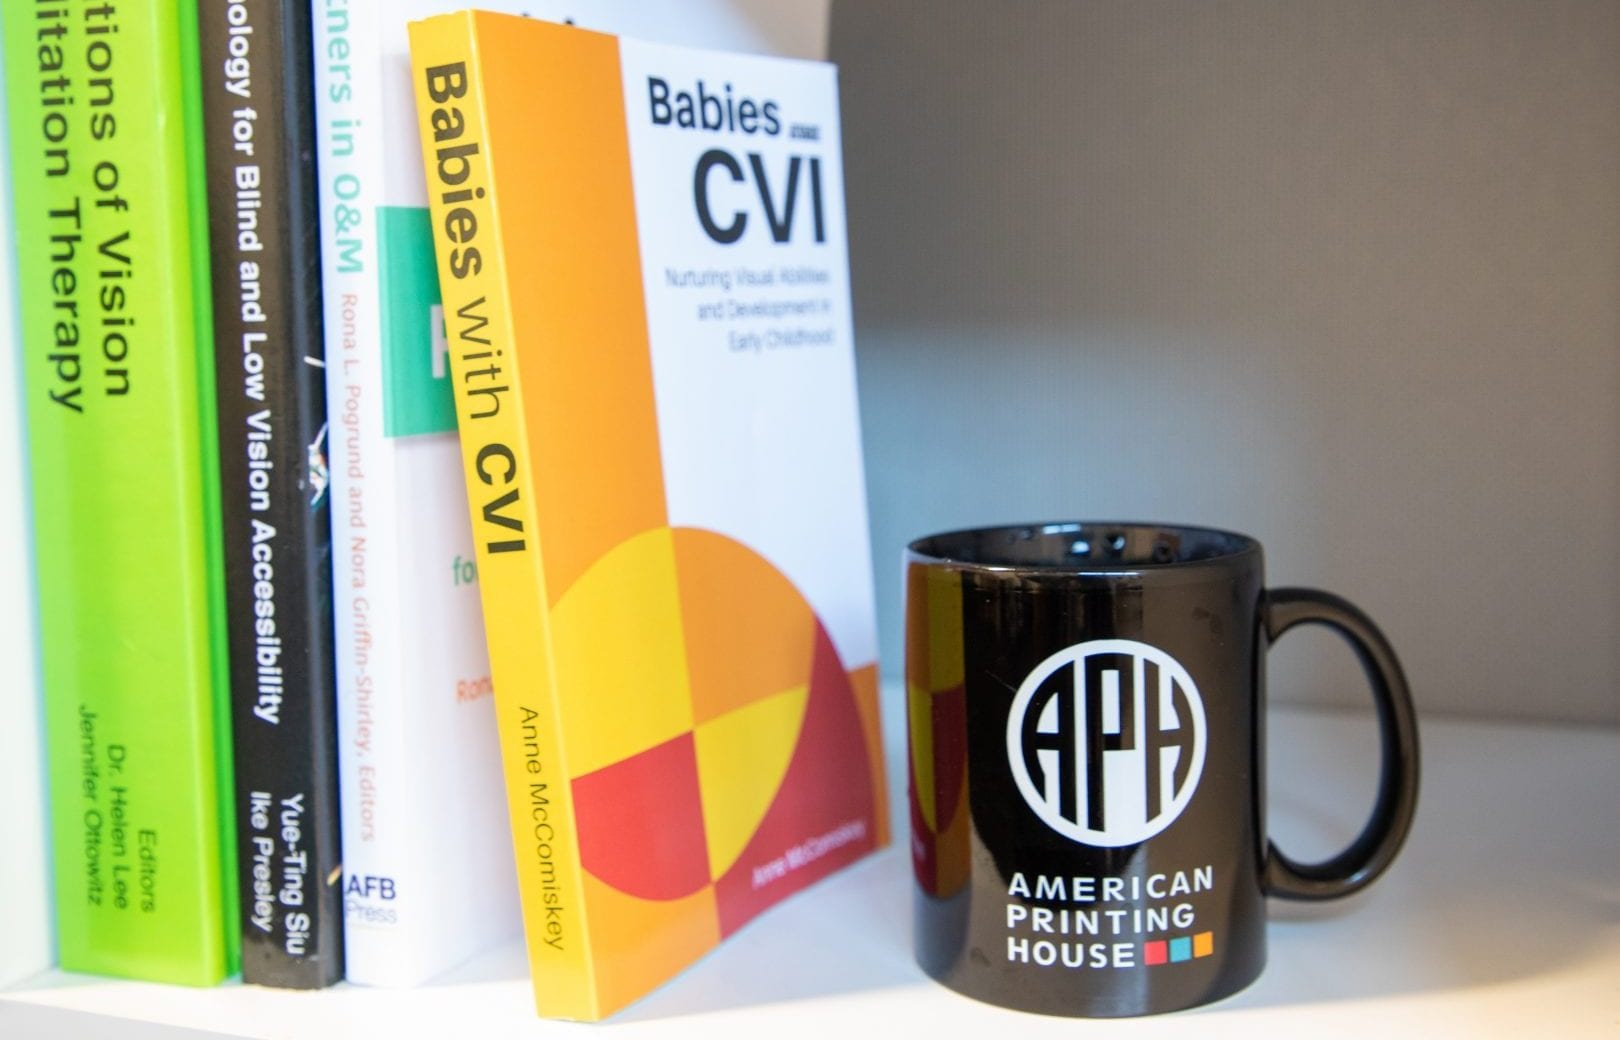 babies with CVI book sits on a bookshelf with other APH Press books. a black APH coffee up sits next to them.